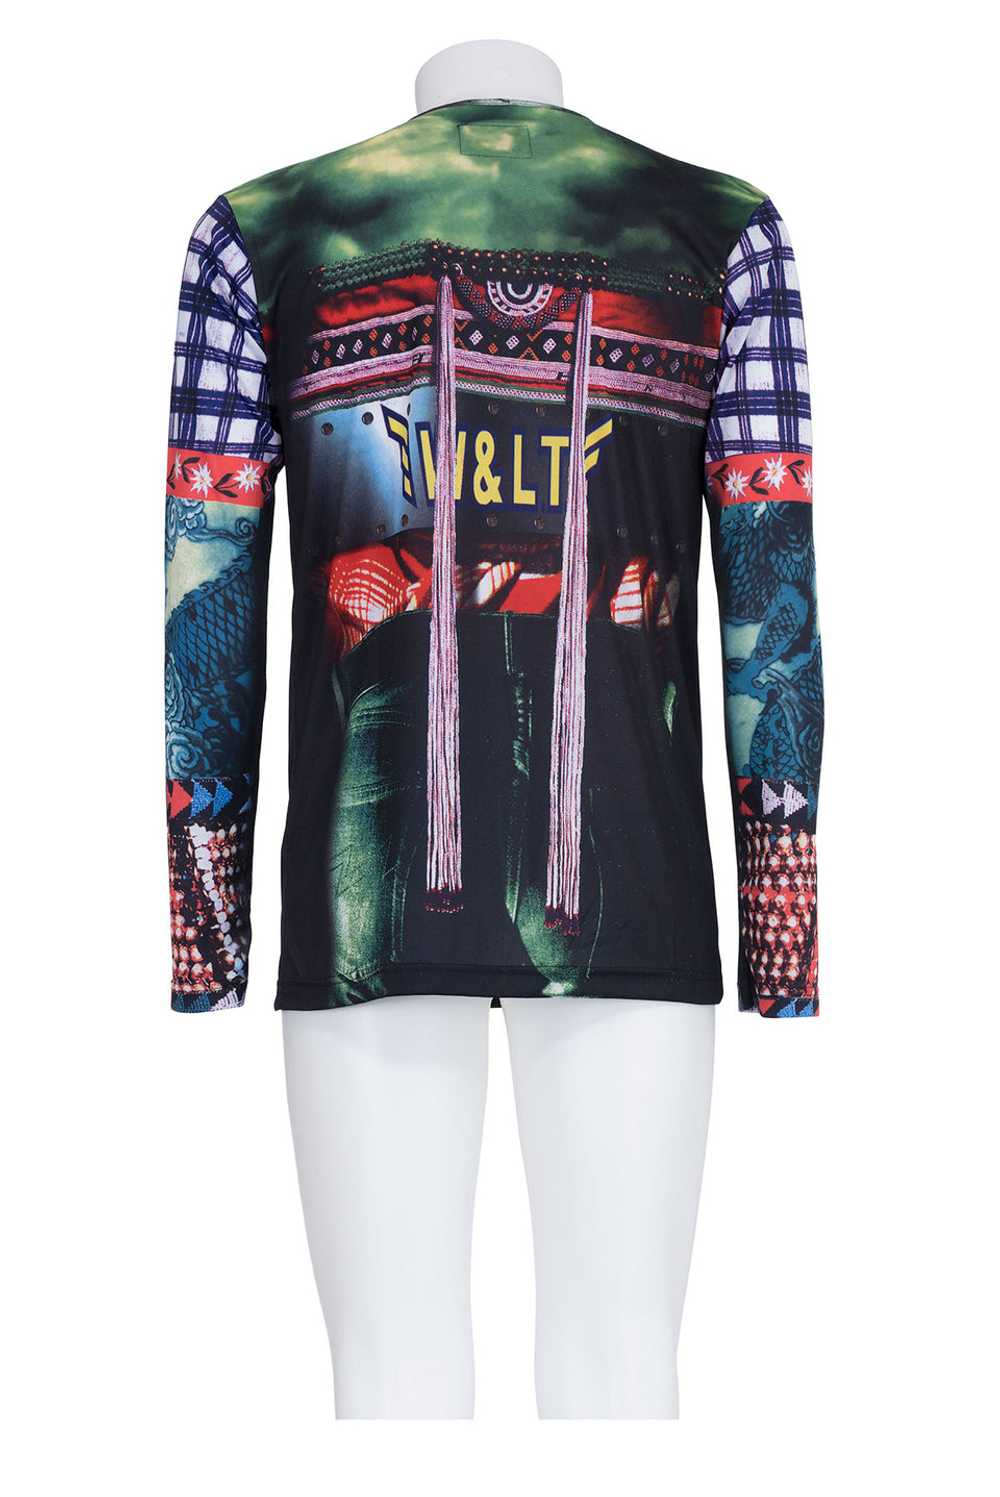 WILD AND LETHAL TRASH SS 96 LONG SLEEVE PRINTED T… - image 4